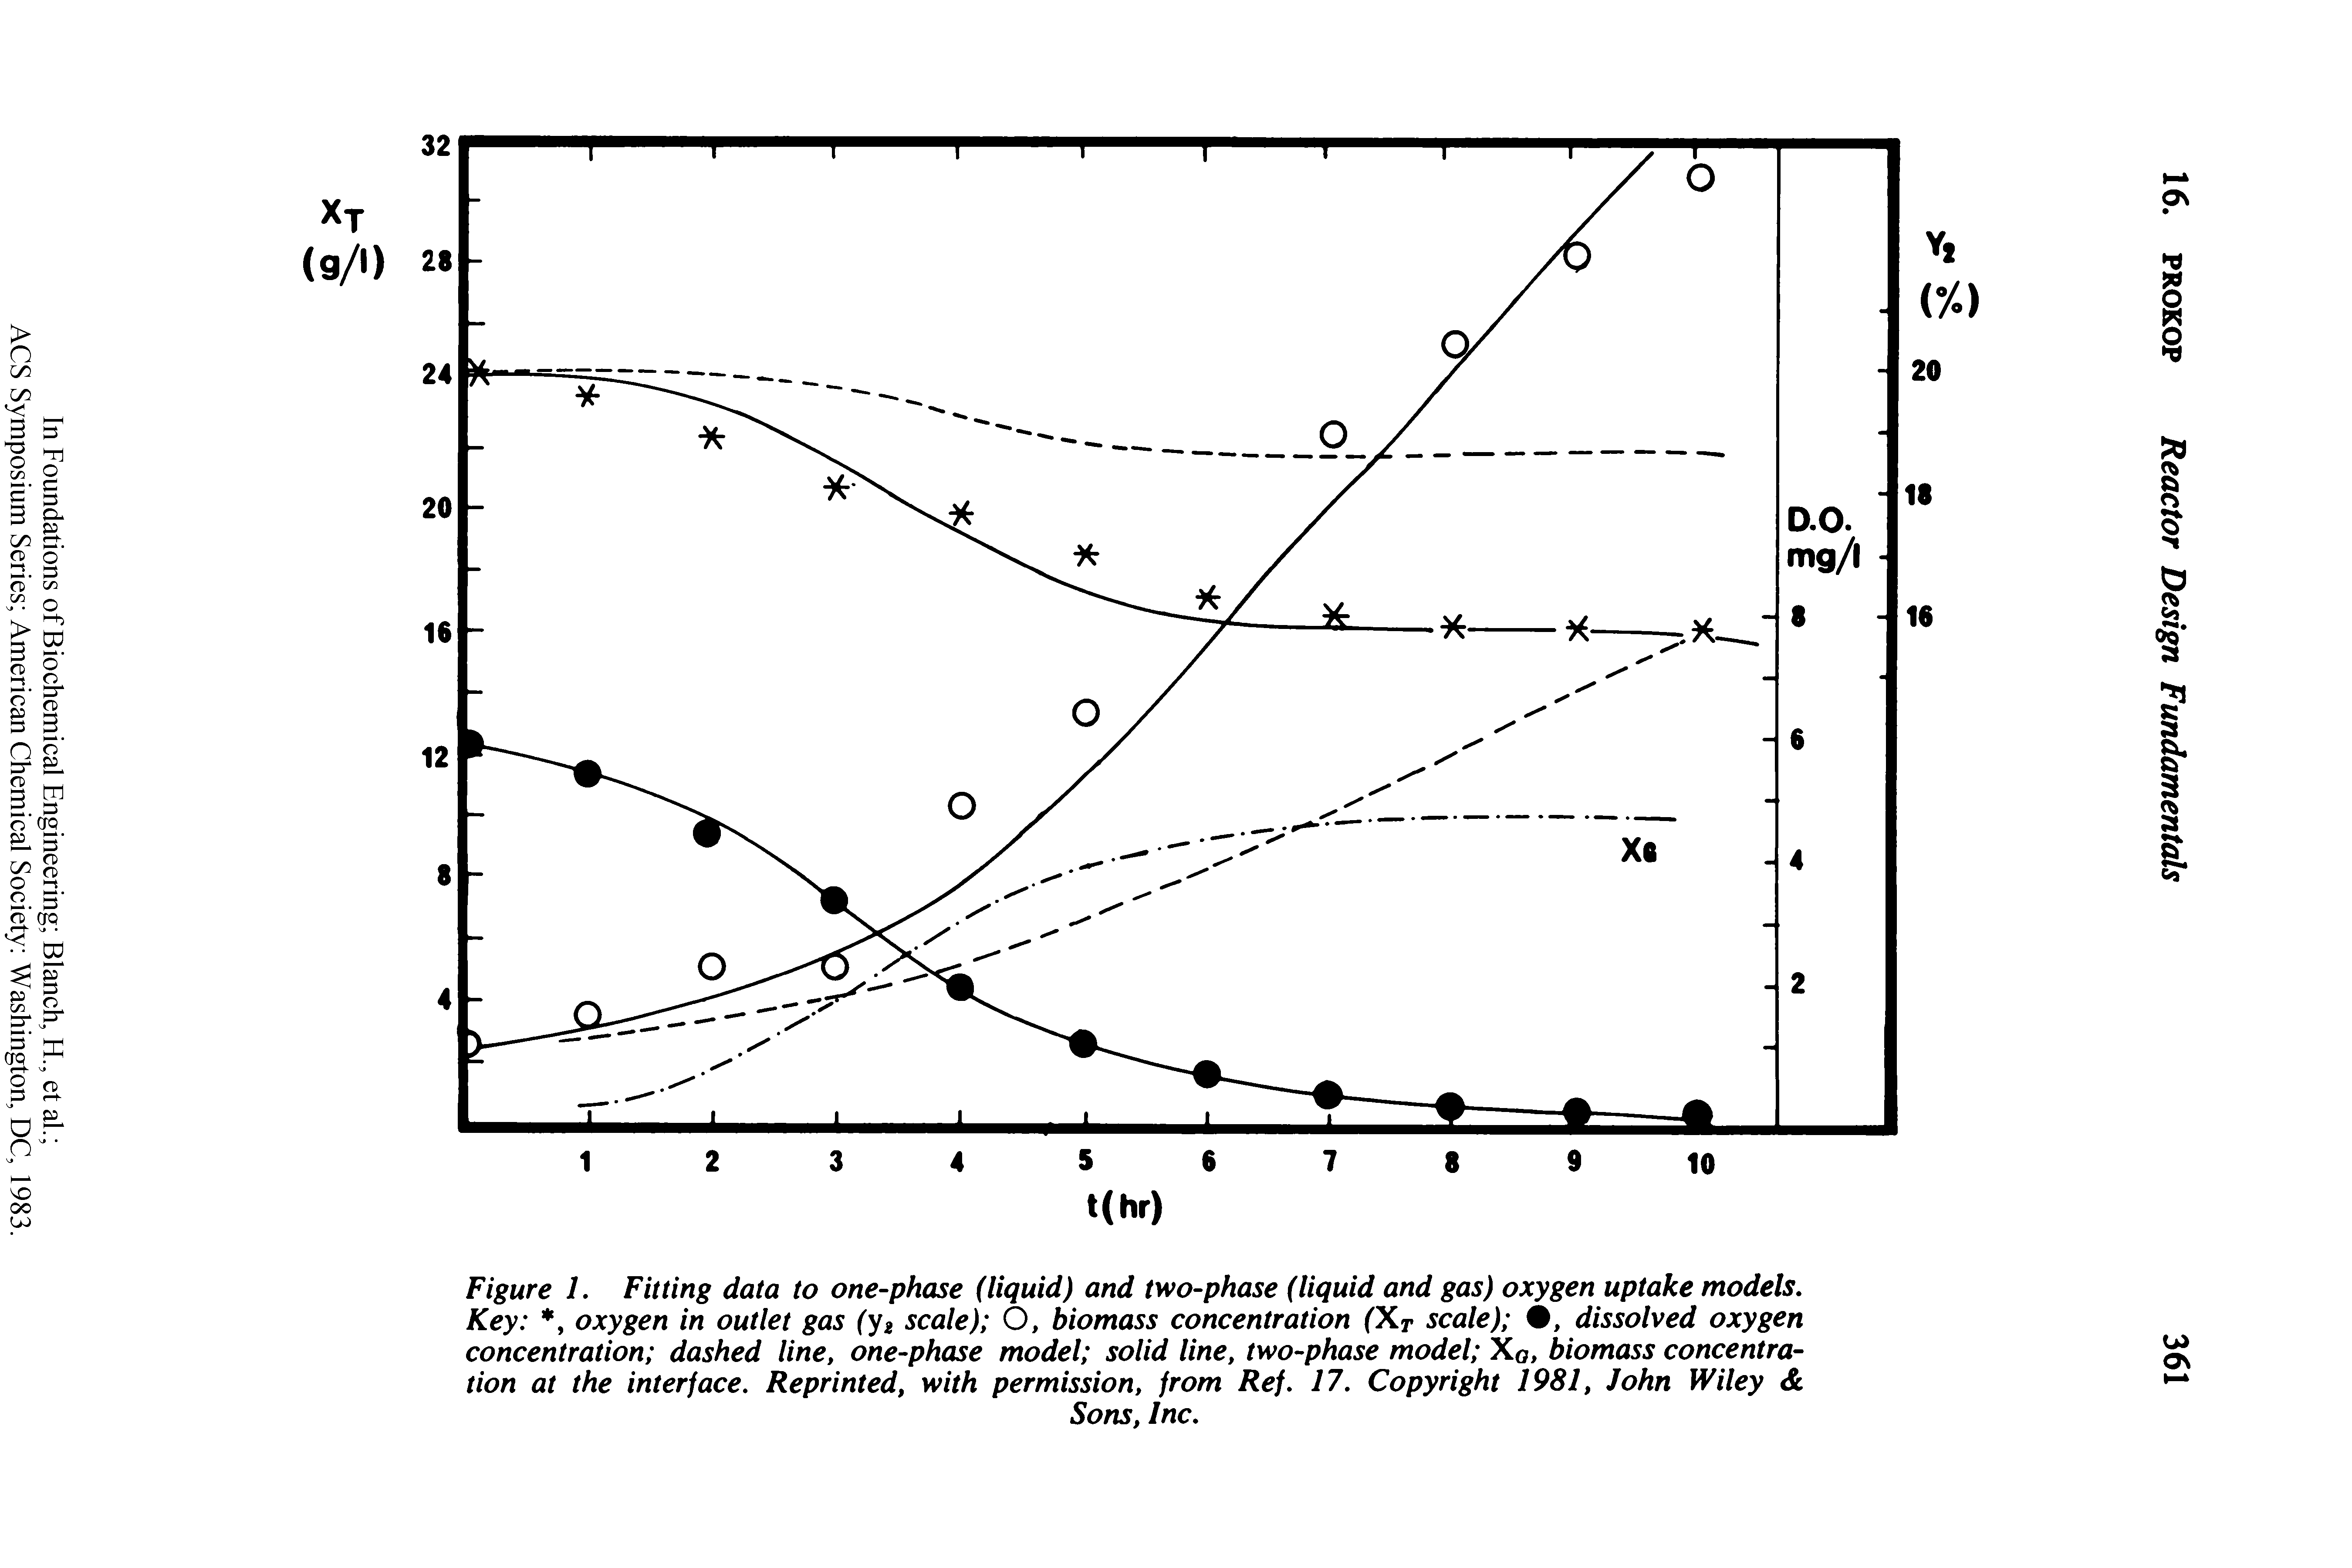 Figure 1. Fitting data to one-phase (liquid) and two-phase (liquid and gas) oxygen uptake models. Key , oxygen in outlet gas (y scale) O, biomass concentration (Xt scale) , dissolved oxygen concentration dashed line, one-phase model solid line, two-phase model Xq, biomass concentration at the interface. Reprinted, with permission, from Ref. 17. Copyright 1981, John Wiley ...